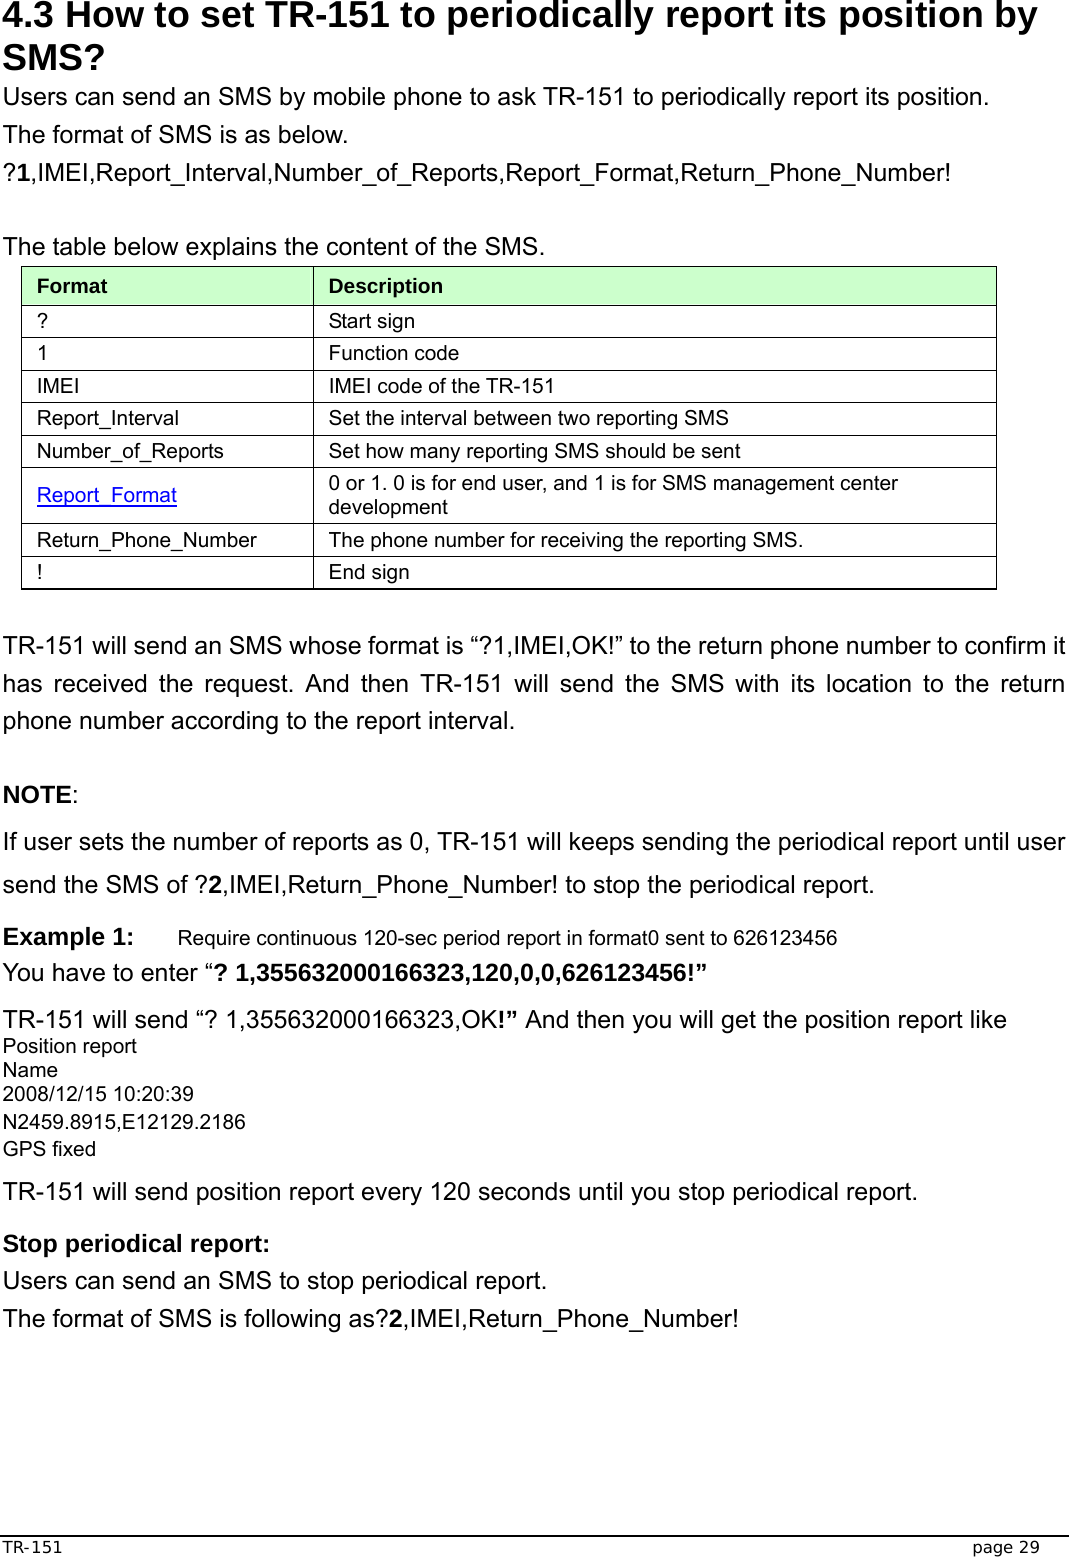  TR-151   page 29 4.3 How to set TR-151 to periodically report its position by SMS? Users can send an SMS by mobile phone to ask TR-151 to periodically report its position.   The format of SMS is as below. ?1,IMEI,Report_Interval,Number_of_Reports,Report_Format,Return_Phone_Number!  The table below explains the content of the SMS. Format  Description ? Start sign  1 Function code  IMEI  IMEI code of the TR-151 Report_Interval  Set the interval between two reporting SMS Number_of_Reports  Set how many reporting SMS should be sent Report_Format 0 or 1. 0 is for end user, and 1 is for SMS management center development Return_Phone_Number  The phone number for receiving the reporting SMS. ! End sign  TR-151 will send an SMS whose format is “?1,IMEI,OK!” to the return phone number to confirm it has received the request. And then TR-151 will send the SMS with its location to the return phone number according to the report interval.  NOTE: If user sets the number of reports as 0, TR-151 will keeps sending the periodical report until user send the SMS of ?2,IMEI,Return_Phone_Number! to stop the periodical report. Example 1: Require continuous 120-sec period report in format0 sent to 626123456 You have to enter “? 1,355632000166323,120,0,0,626123456!” TR-151 will send “? 1,355632000166323,OK!” And then you will get the position report like Position report   Name 2008/12/15 10:20:39 N2459.8915,E12129.2186 GPS fixed TR-151 will send position report every 120 seconds until you stop periodical report. Stop periodical report: Users can send an SMS to stop periodical report. The format of SMS is following as?2,IMEI,Return_Phone_Number!   